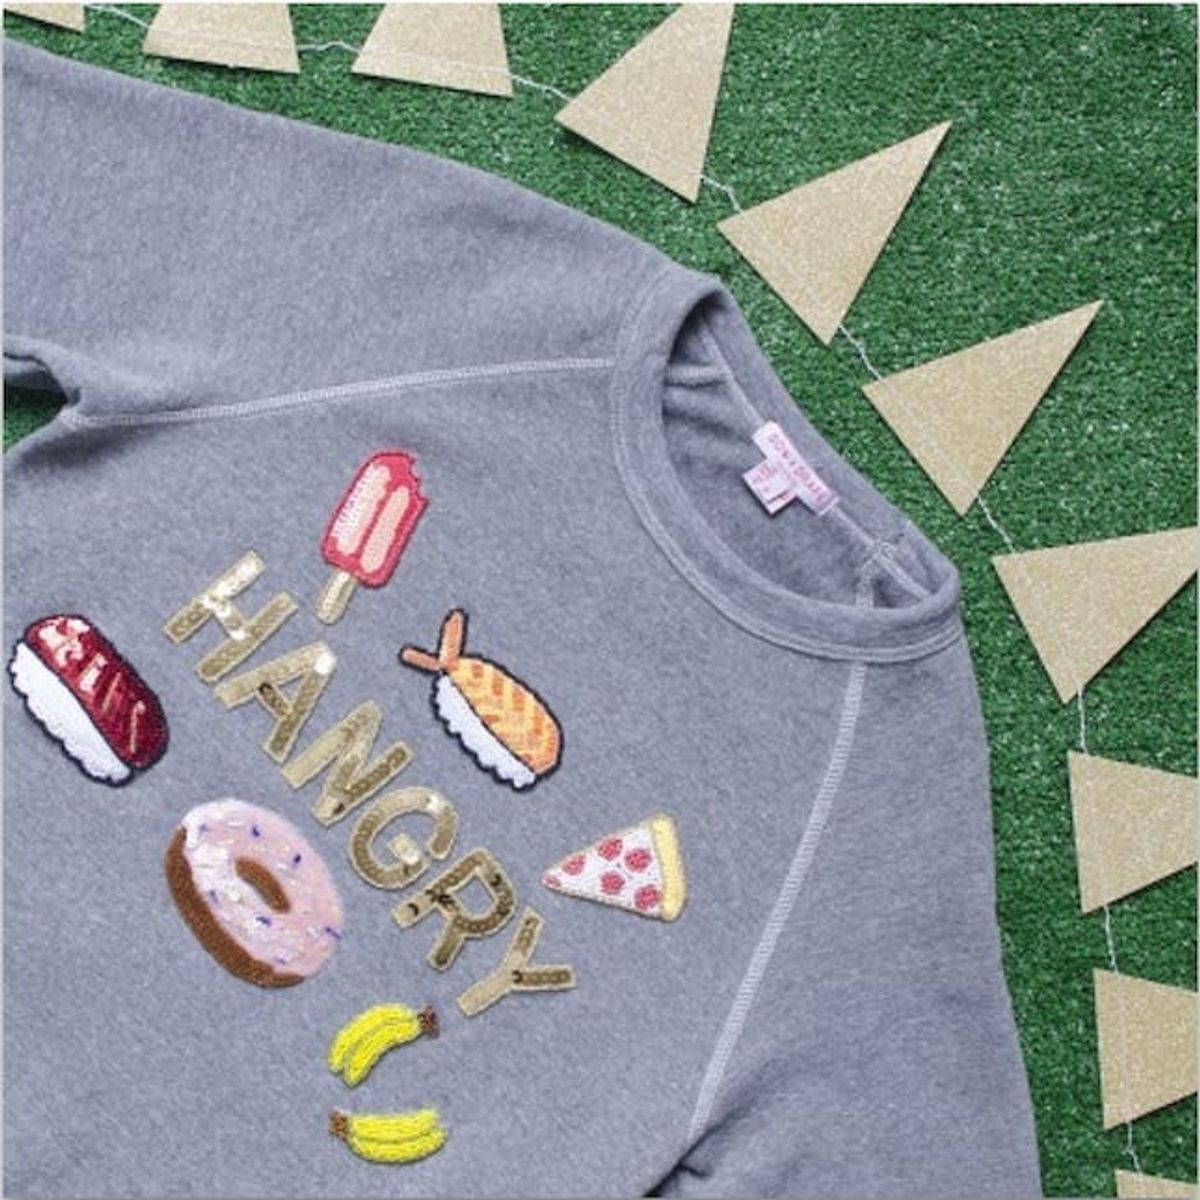 The 10 Most Creative Ways to Customize Your Clothes